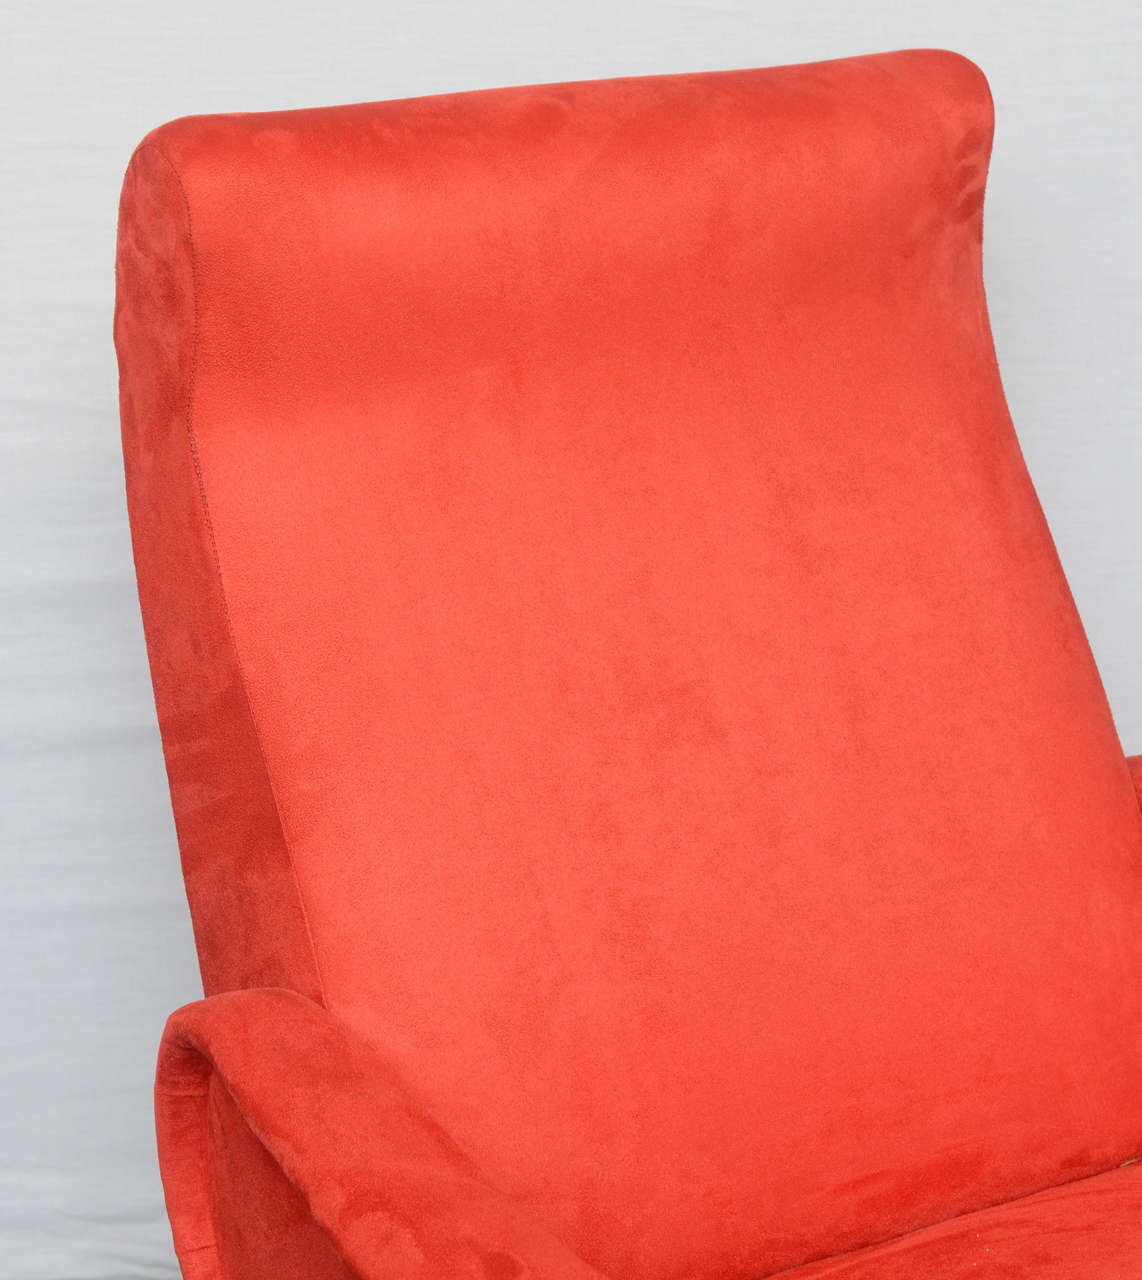 Midcentury Marco Zanusso Style Red Lounge Chairs 4